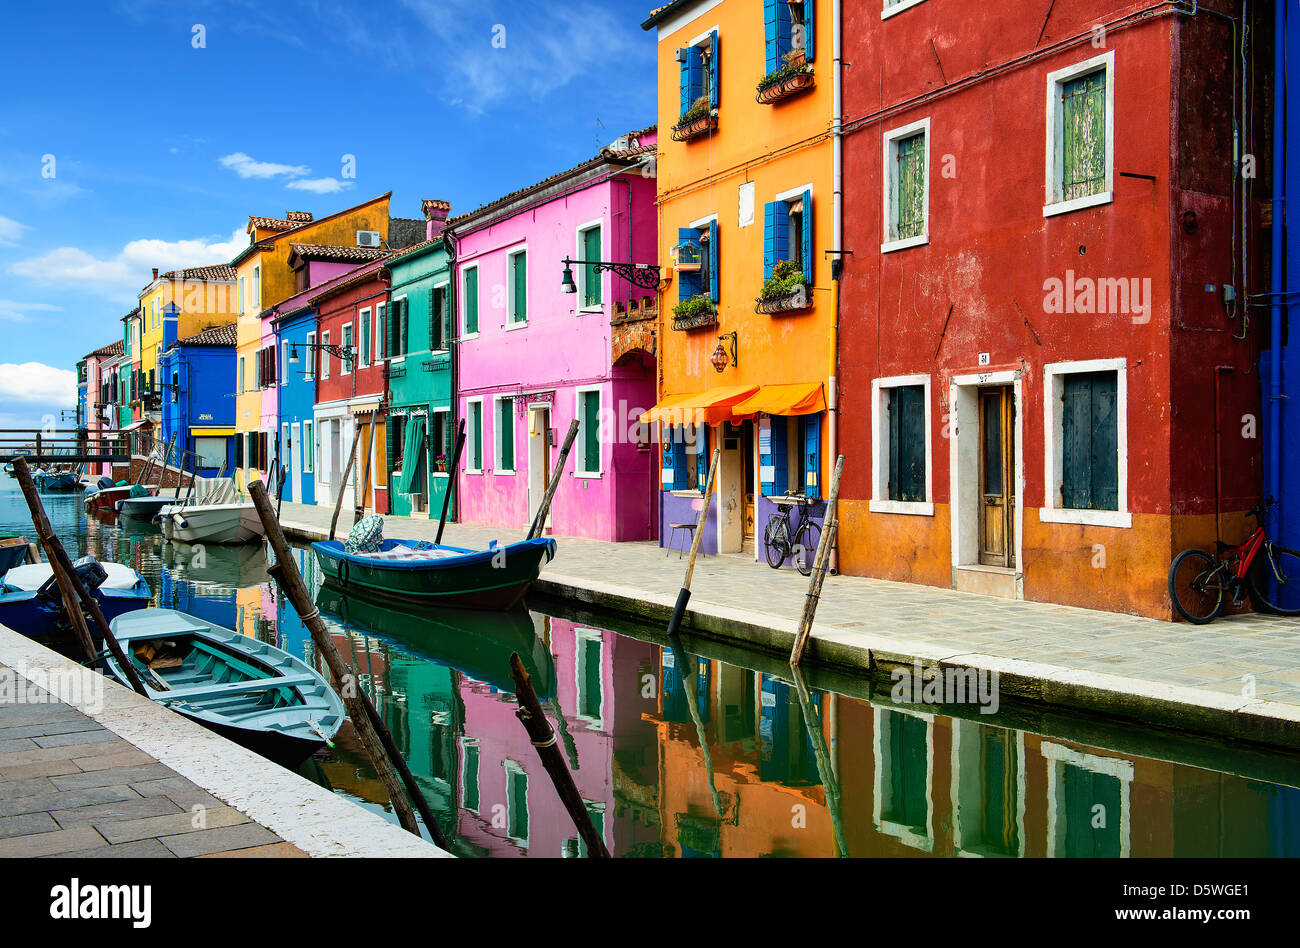 Colorful buildings in Burano island sunny street, Venise, Italy Stock Photo